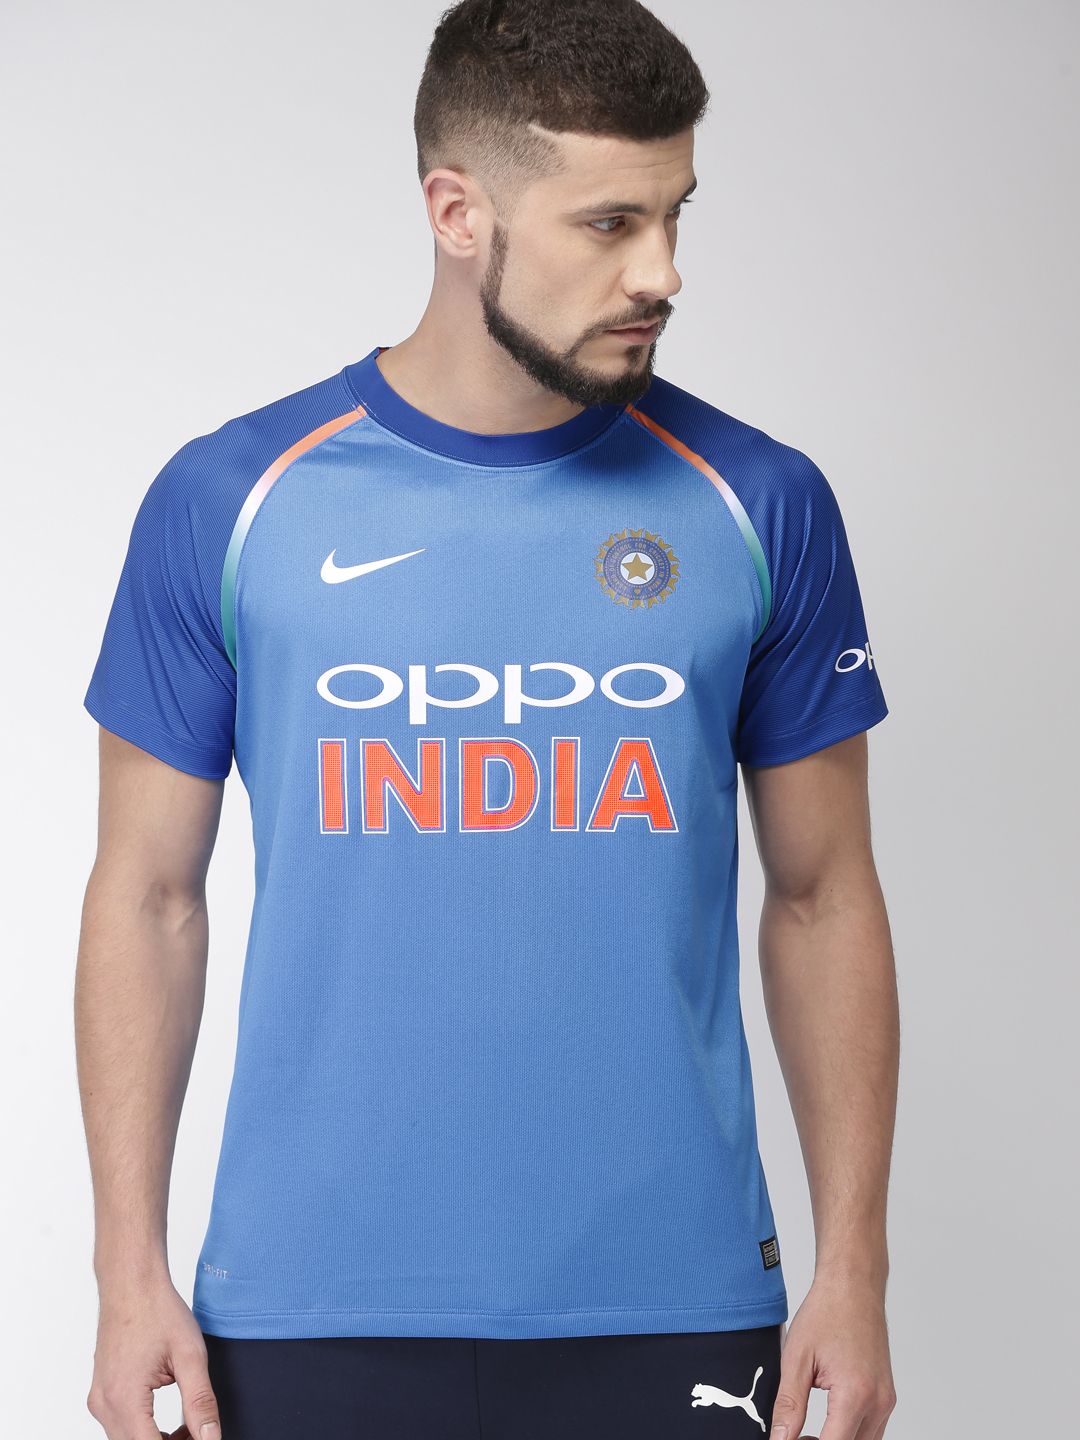 indian cricket team jersey for sale